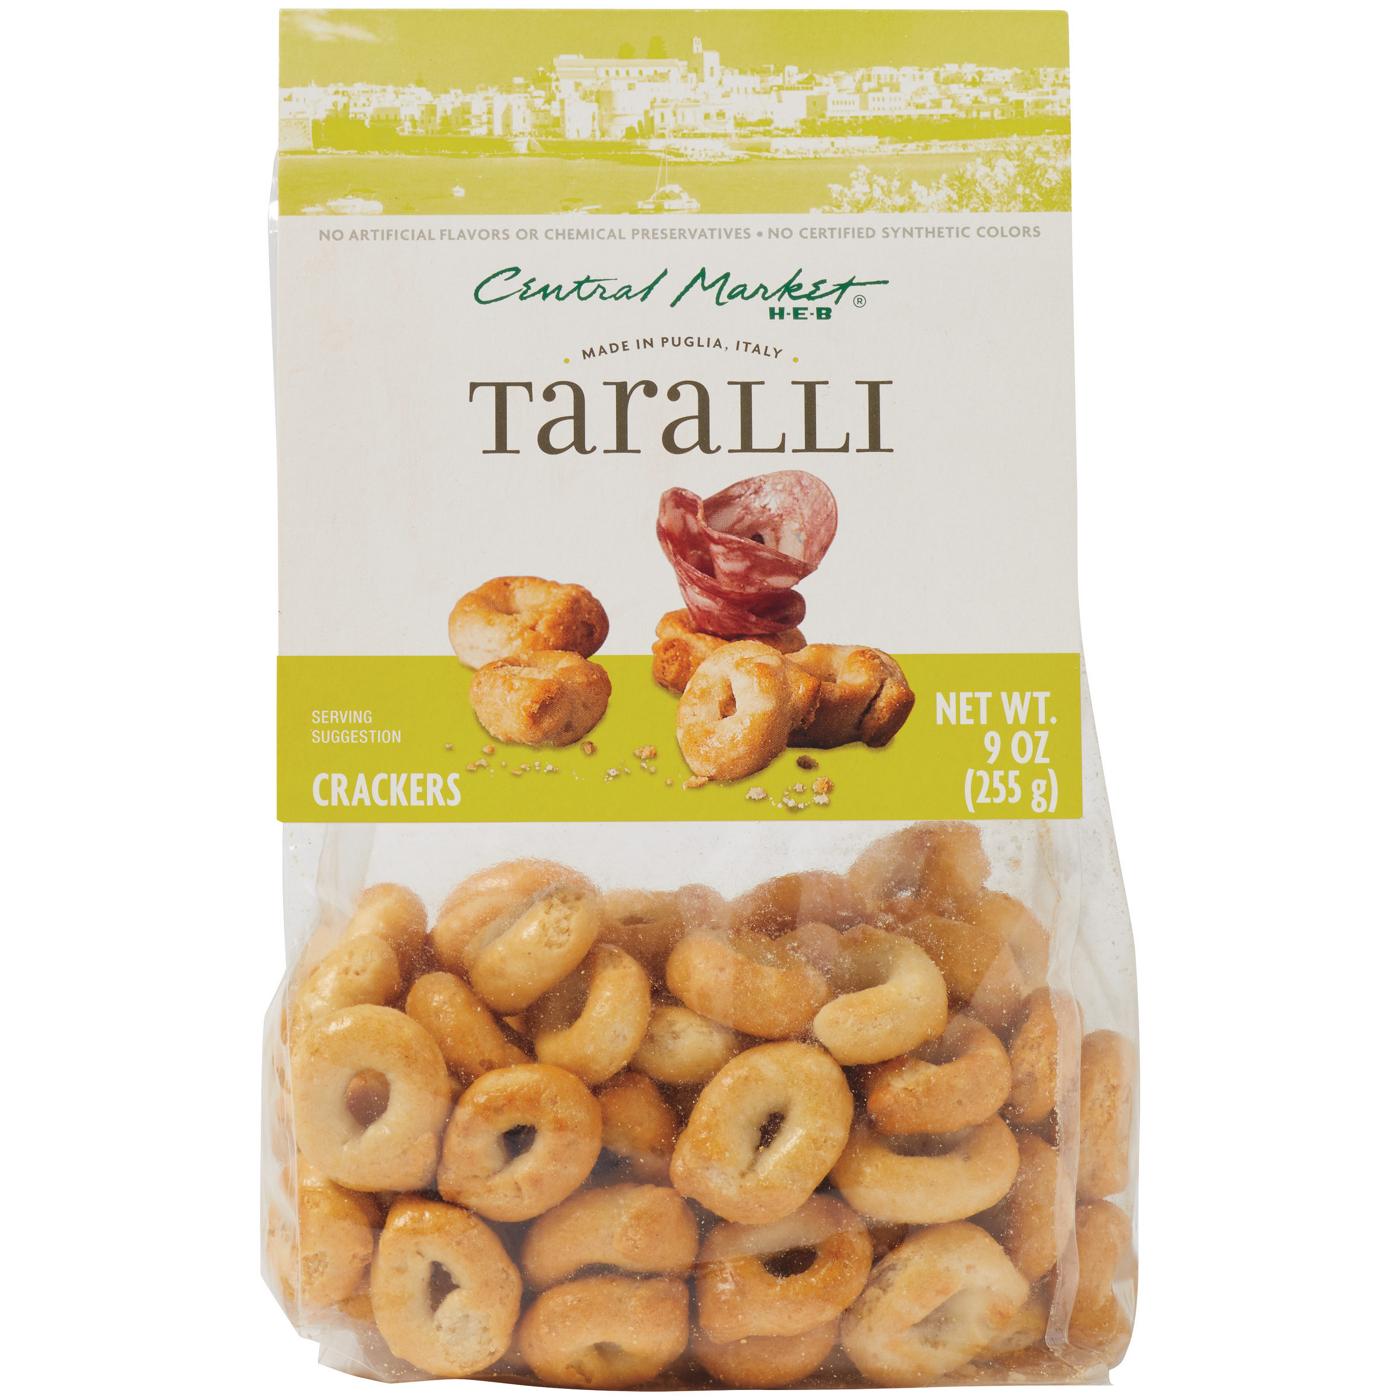 Central Market Taralli Crackers; image 1 of 2